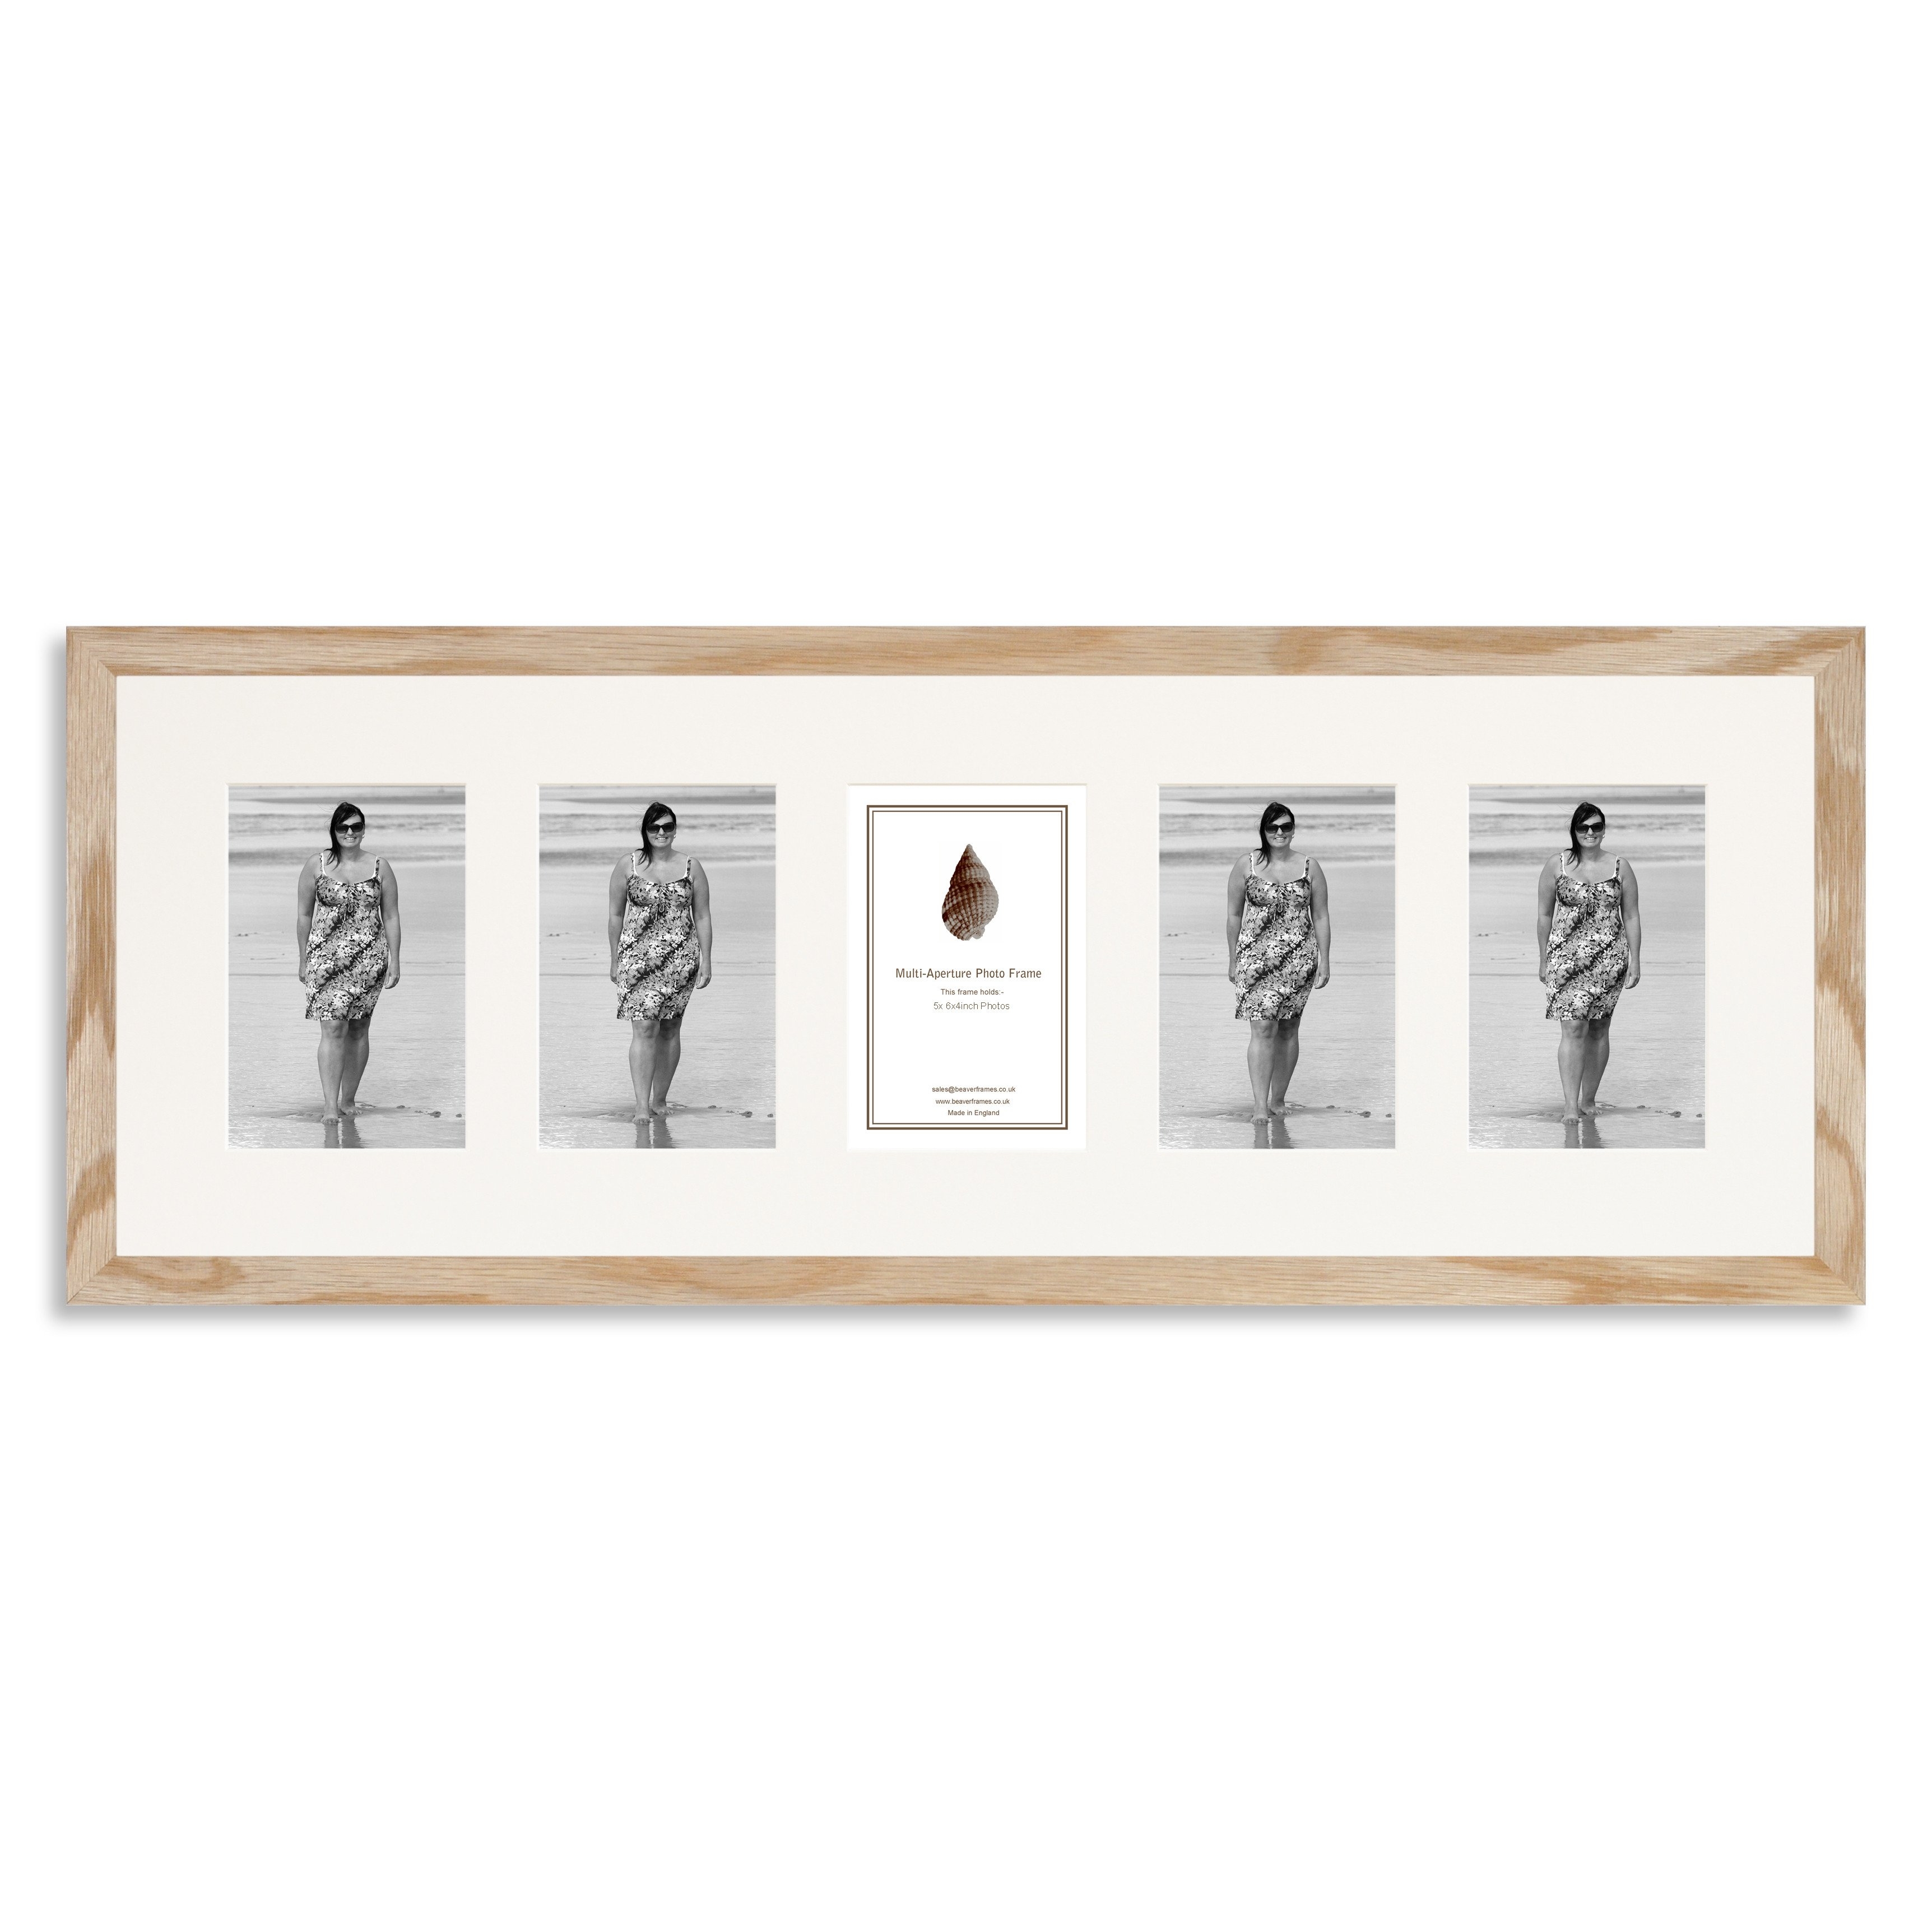 Solid Oak Multi Aperture Photo Frame for five 6×4/4x6inch photos